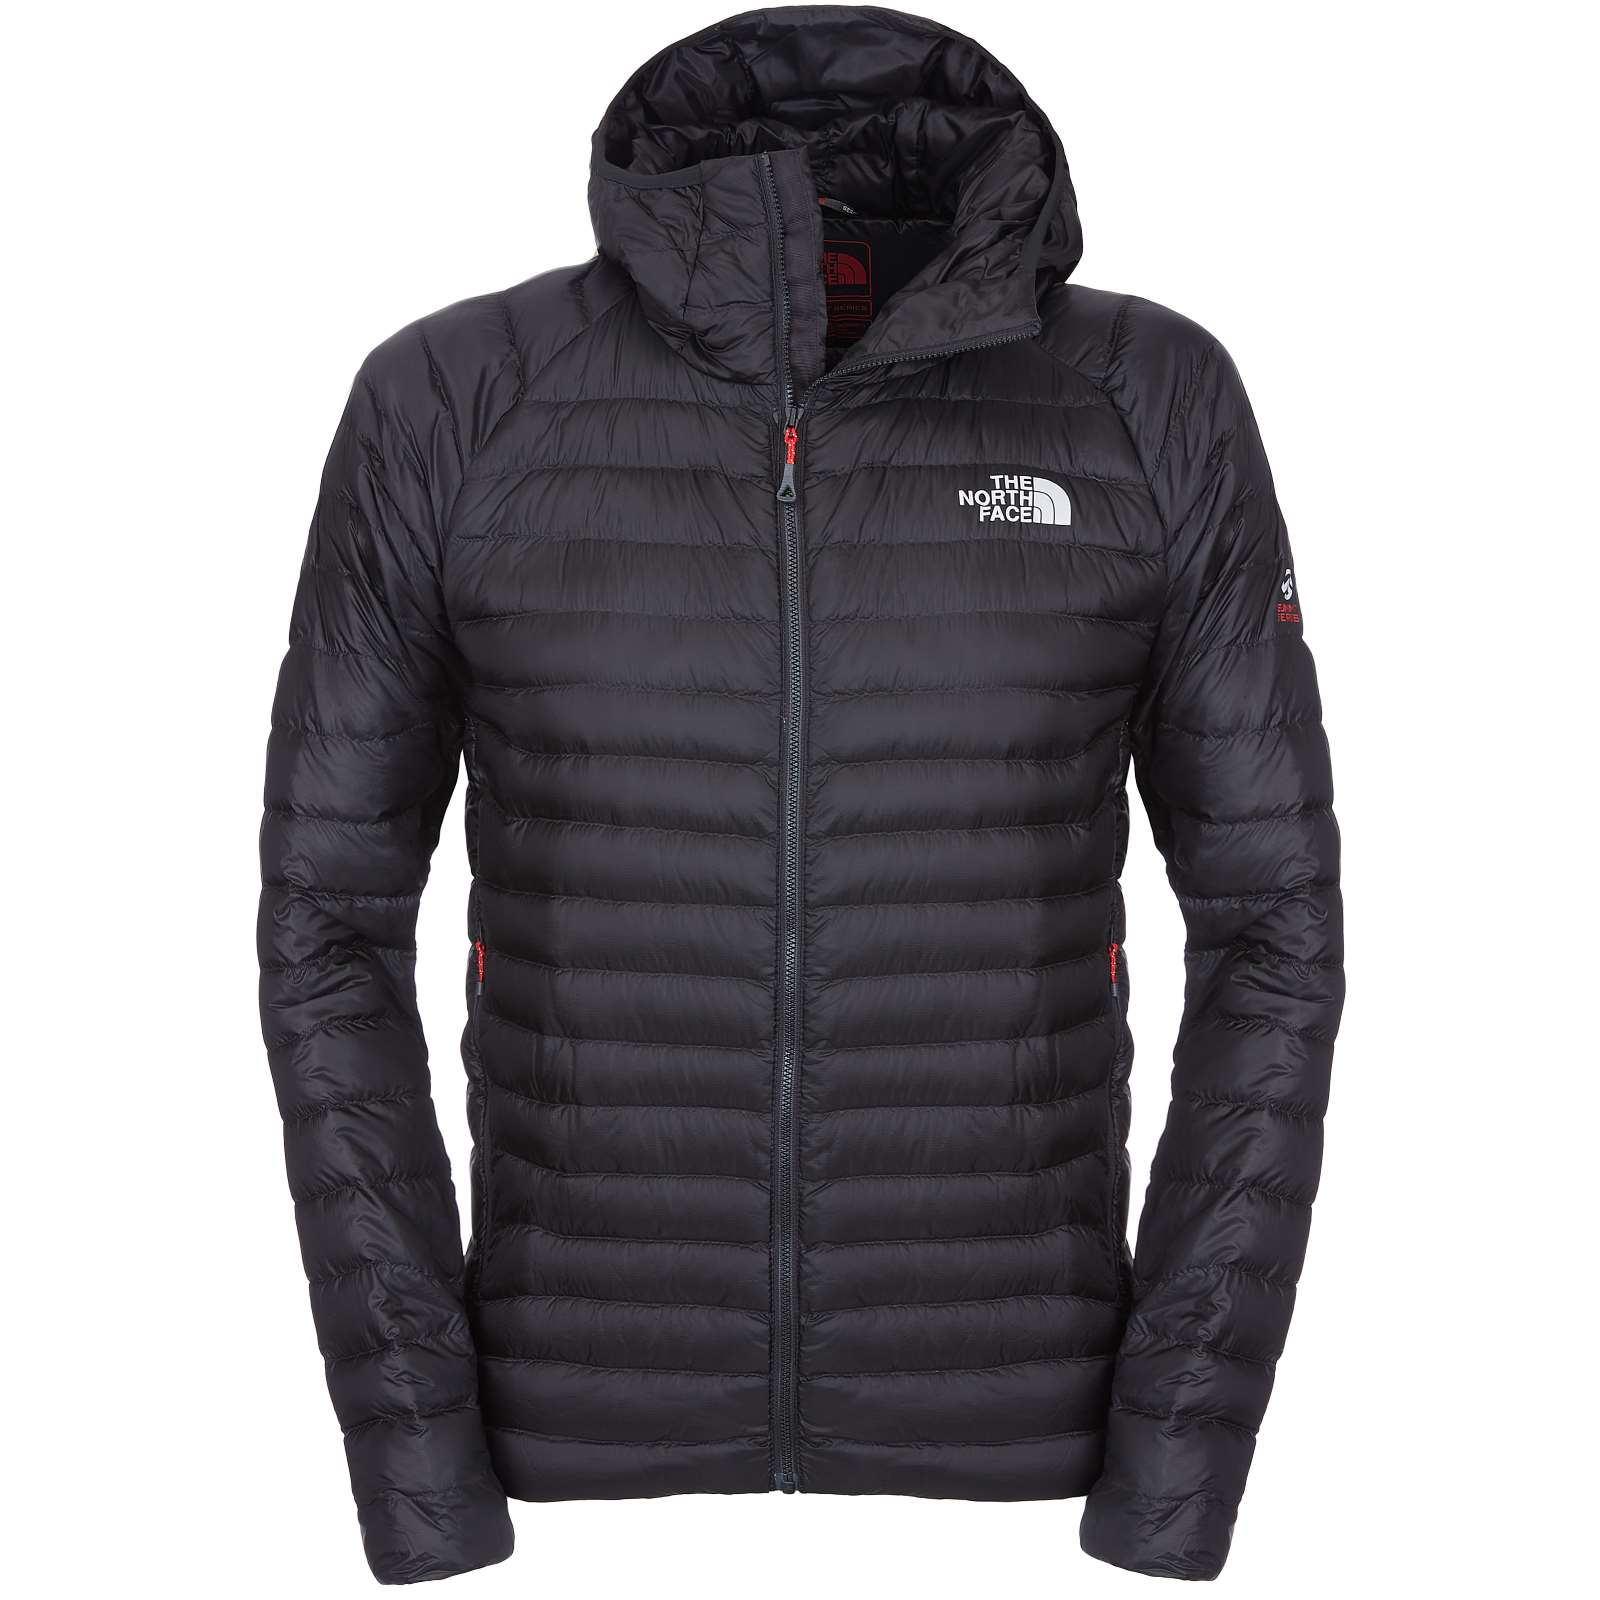 Verminderen Beweren Sneeuwwitje Buy The North Face Men's Quince Hooded Jacket from Outnorth